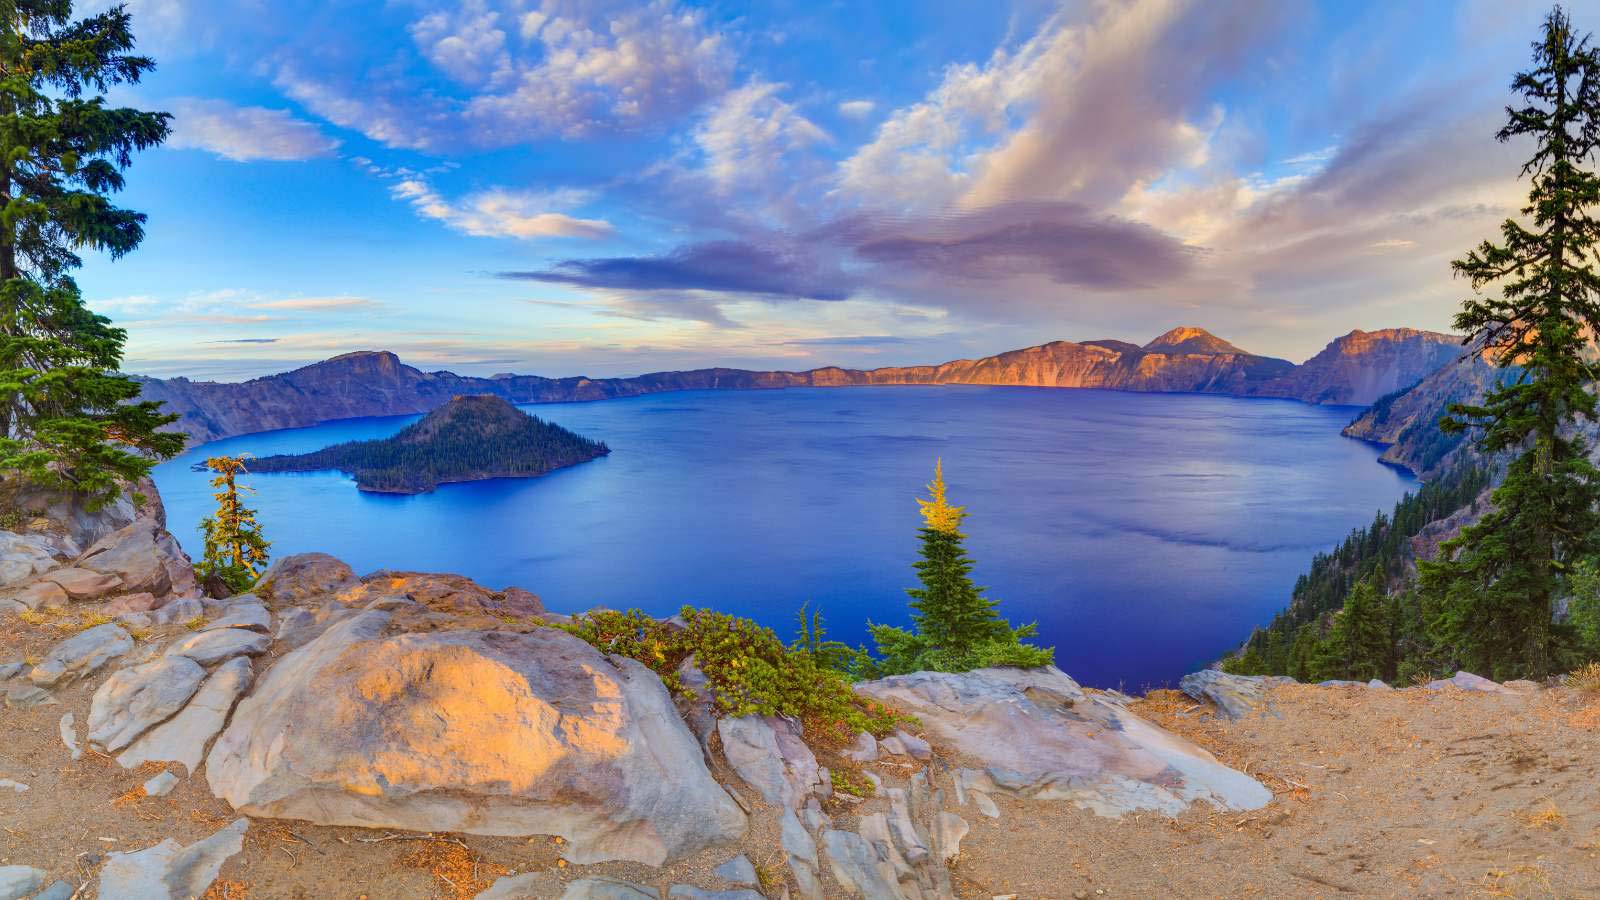 <p>Crater Lake National Park is amazing to see. It’s one of those places, if you sit there and look at it for a while, you’ll just i don’t know it’s just it’s a weird feeling looking at this thing. If you know the backstory of it and how it was created, it’s even more impressive. First of all, it’s the deepest lake in America; it’s 1943 feet deep. The lake’s water comes directly from snow or rain, which often happens in Oregon. And there are no inlets for the lake, and there’s no like little creeks going to it or anything like that. This mountain had its top blown off in a volcanic eruption.</p>